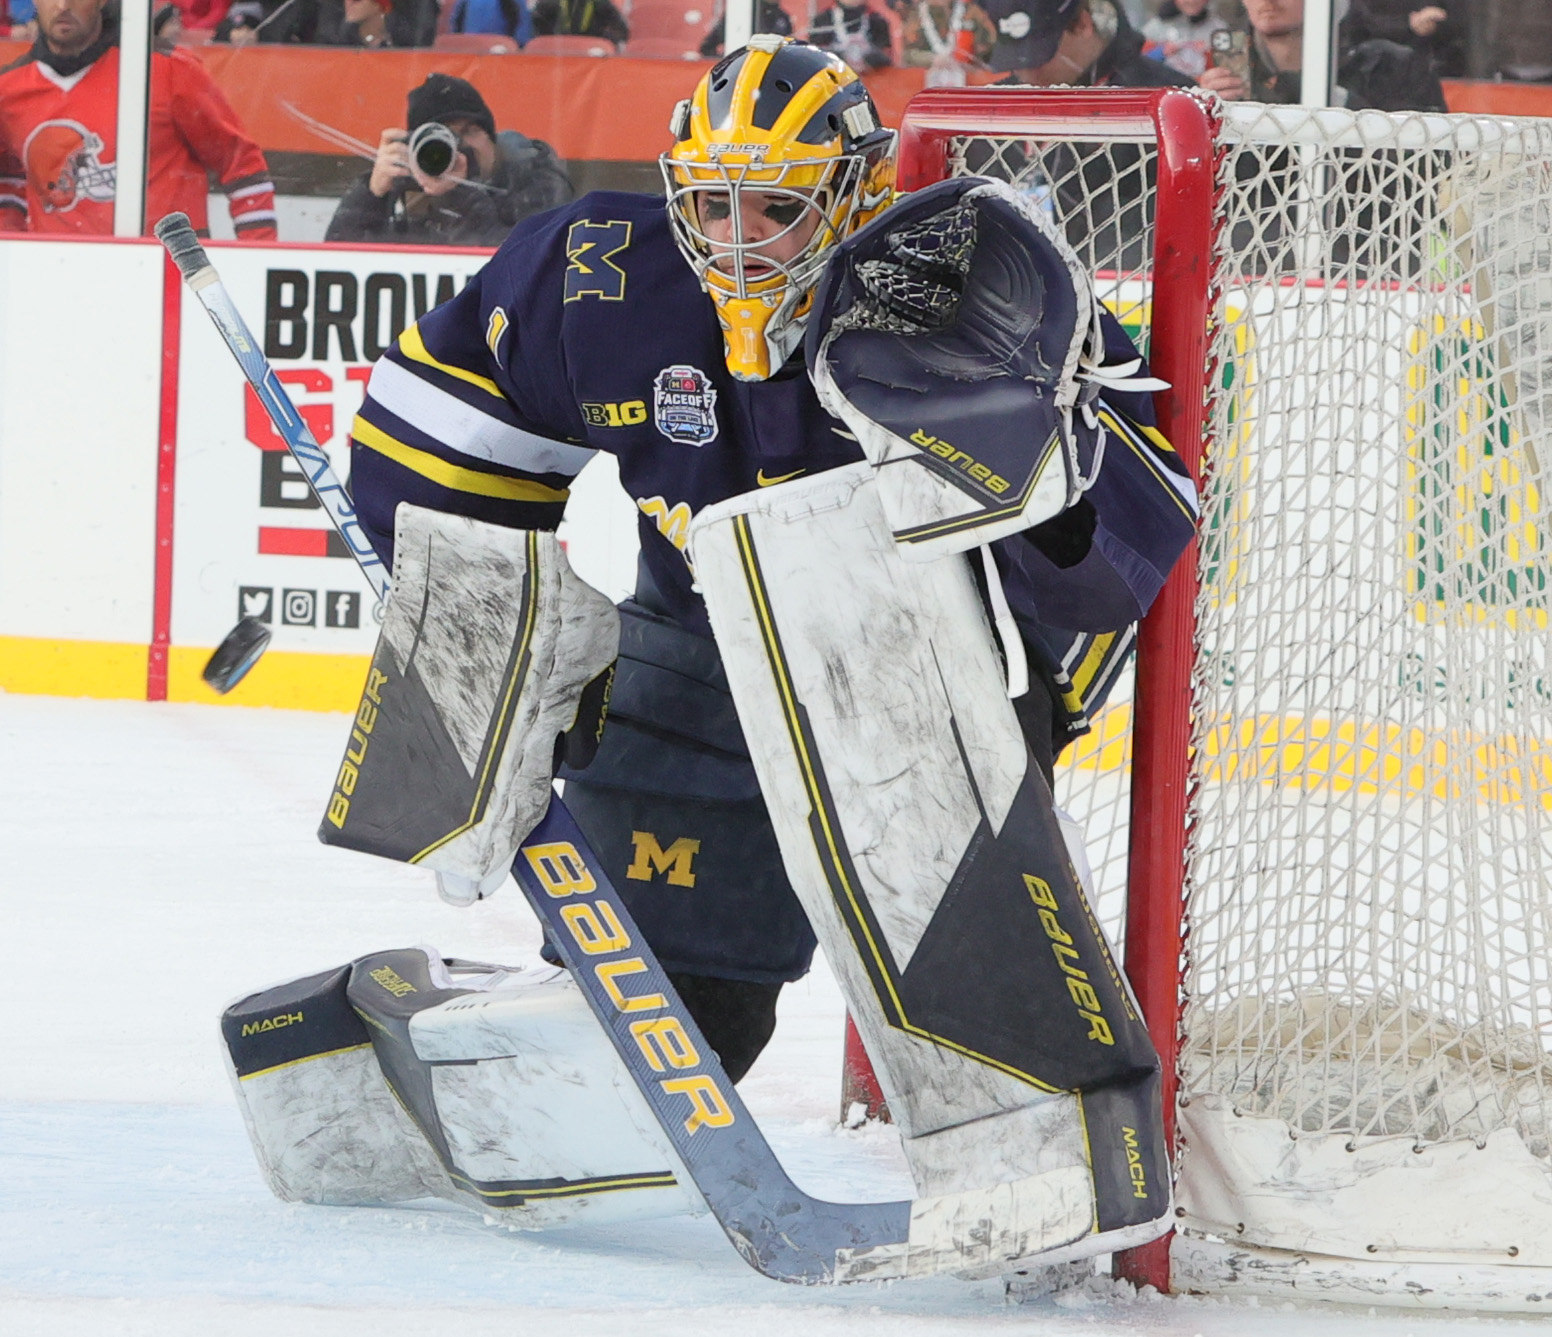 Michigan goalie traded in NHL deal